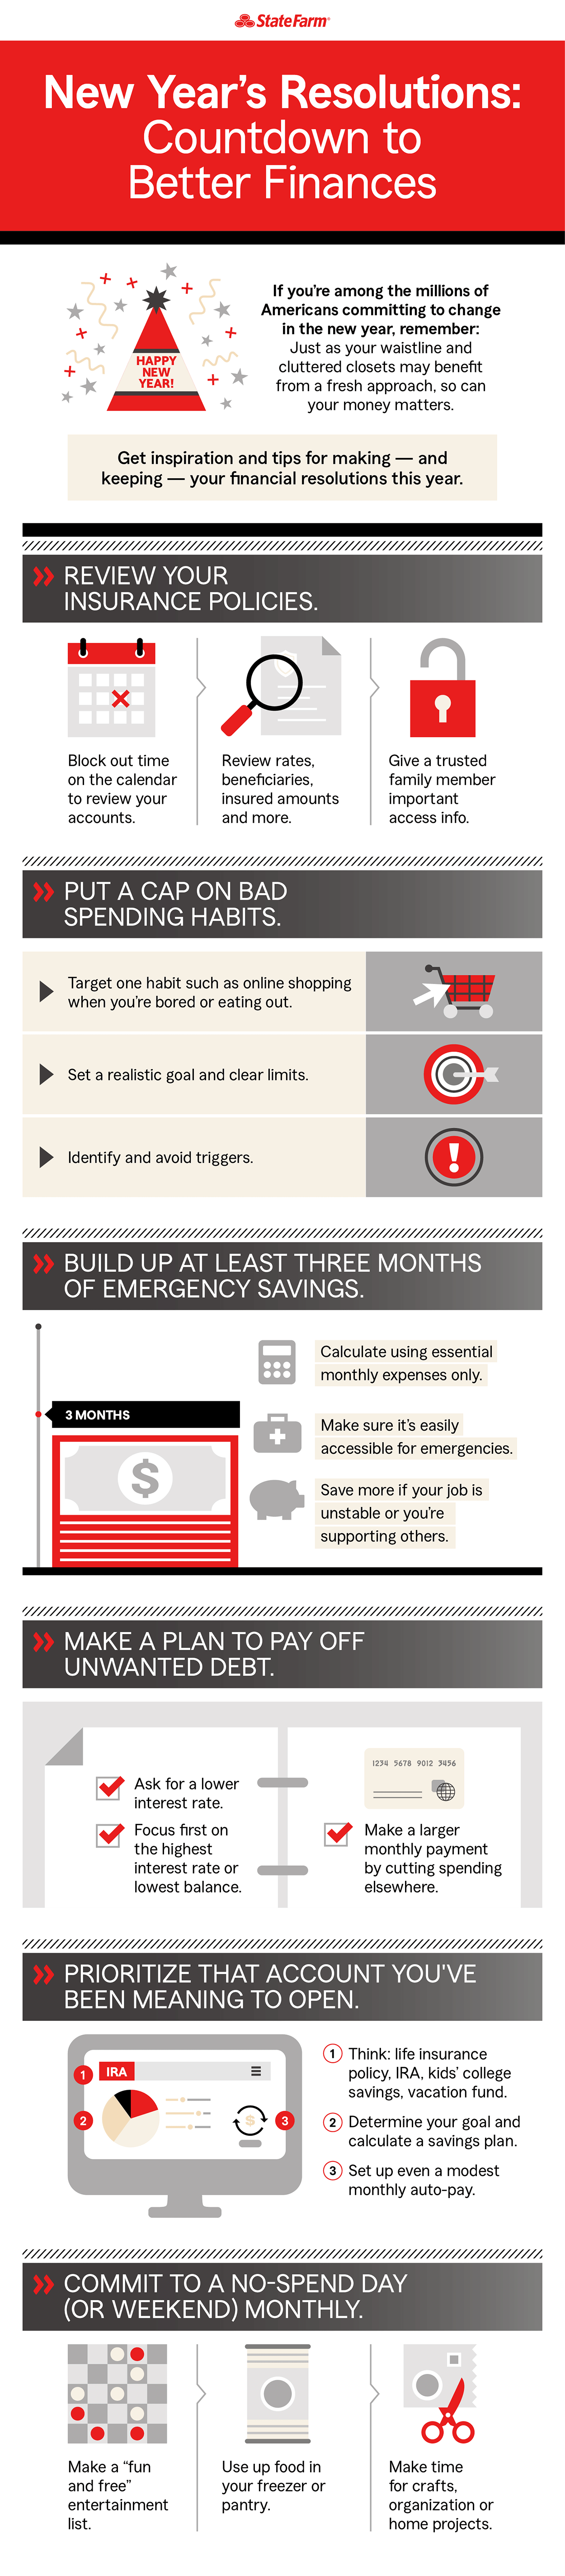 Infographic about financial Resolutions for the New Year